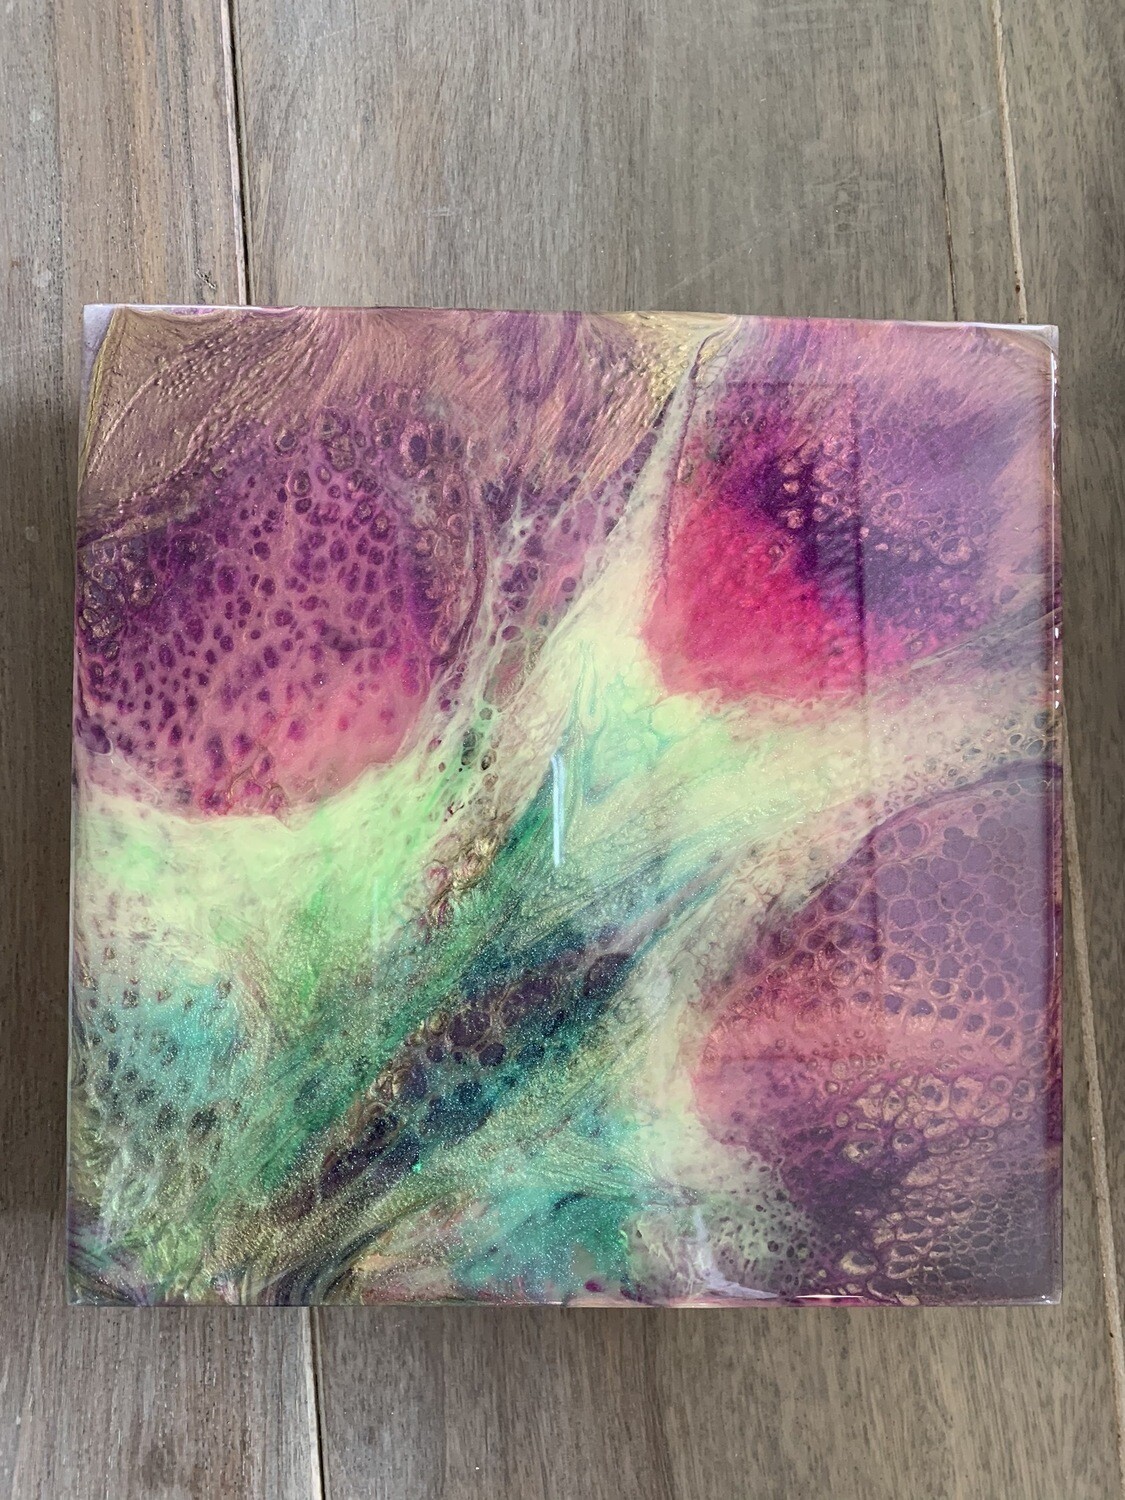 Magenta Blossom 3 available @MukLuk Magpies, Airdrie, Ab